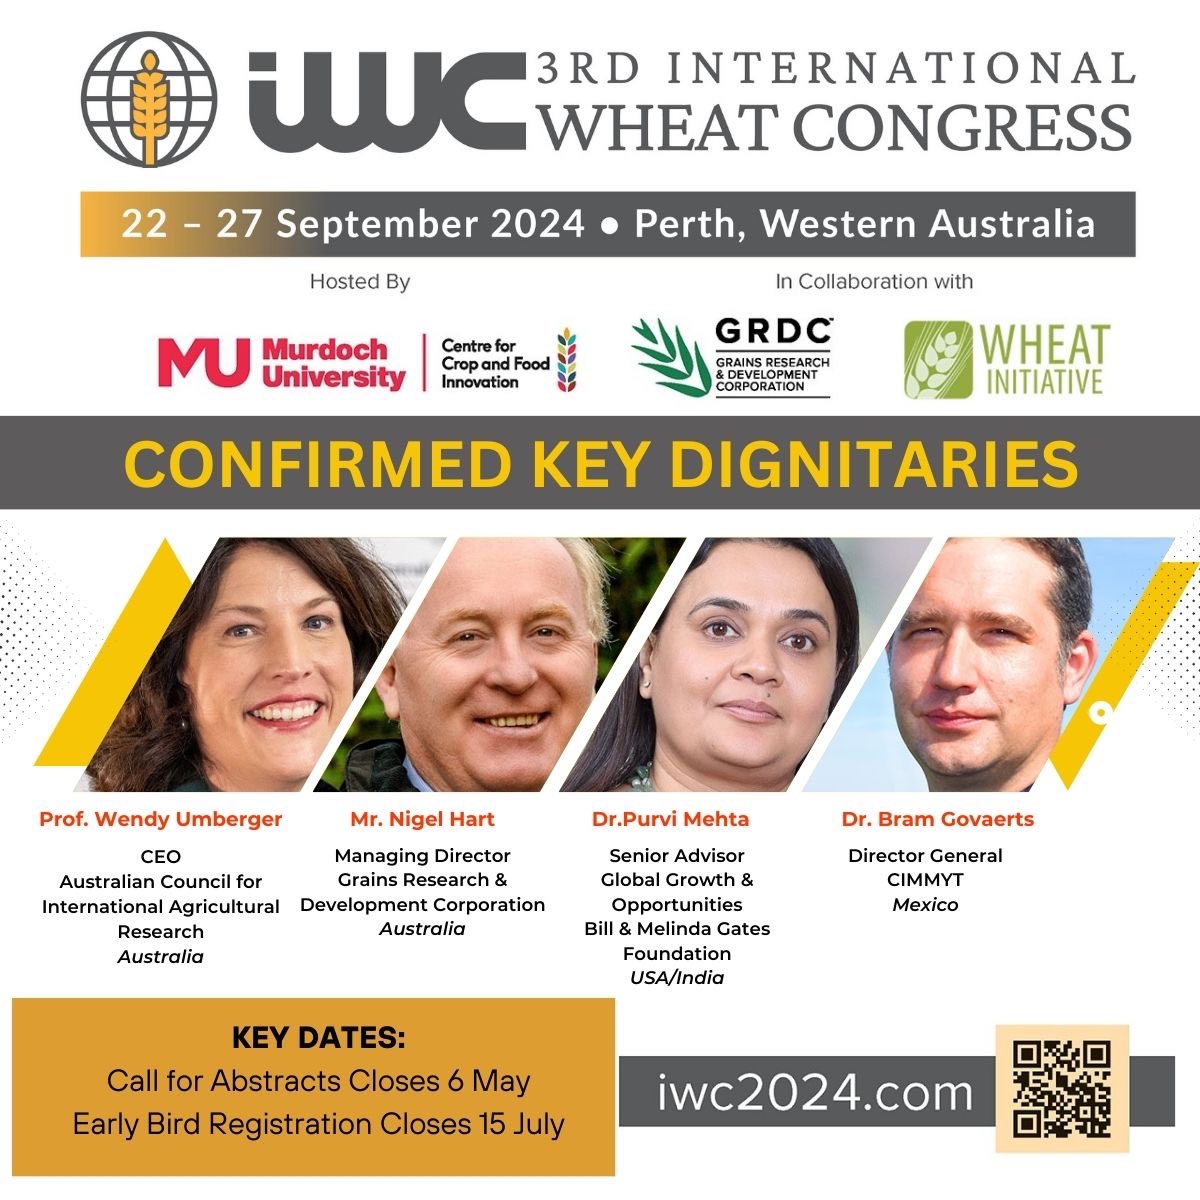 Great news! First speakers for #iwc2024perth @WendyUmberger CEO @ACIARAustralia @Nige_Hart MD @theGRDC, @DrPurviMehta Asia Lead -Agriculture @gatesfoundation, @bramaccimmyt DG @CIMMYT Register/join mailing list - iwc2034.com - early bird registration closes 15 July